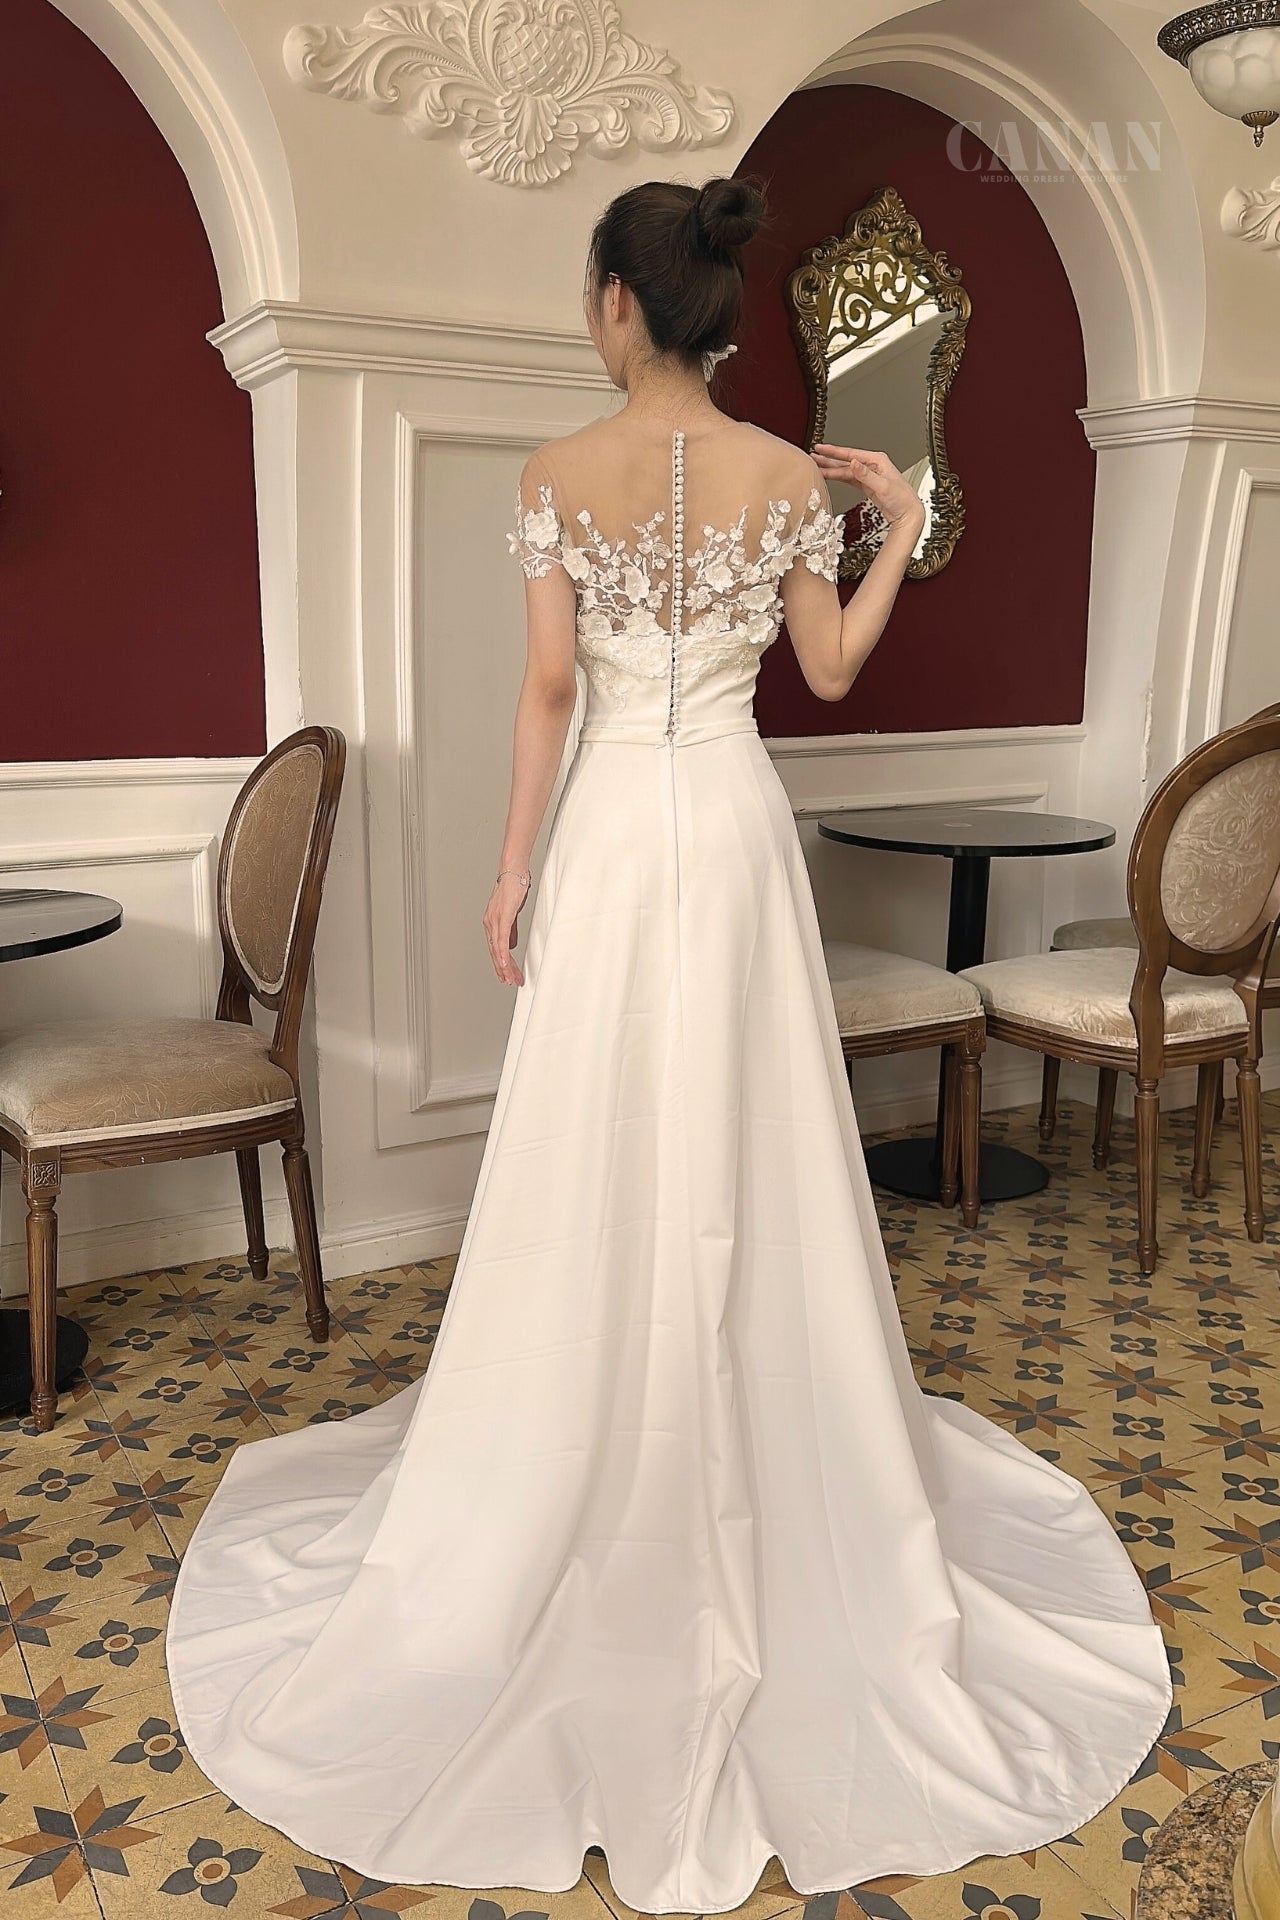 Sheath Wedding Dress Featuring Soft Satin and Stunning 3D Flower Lace Embellishments